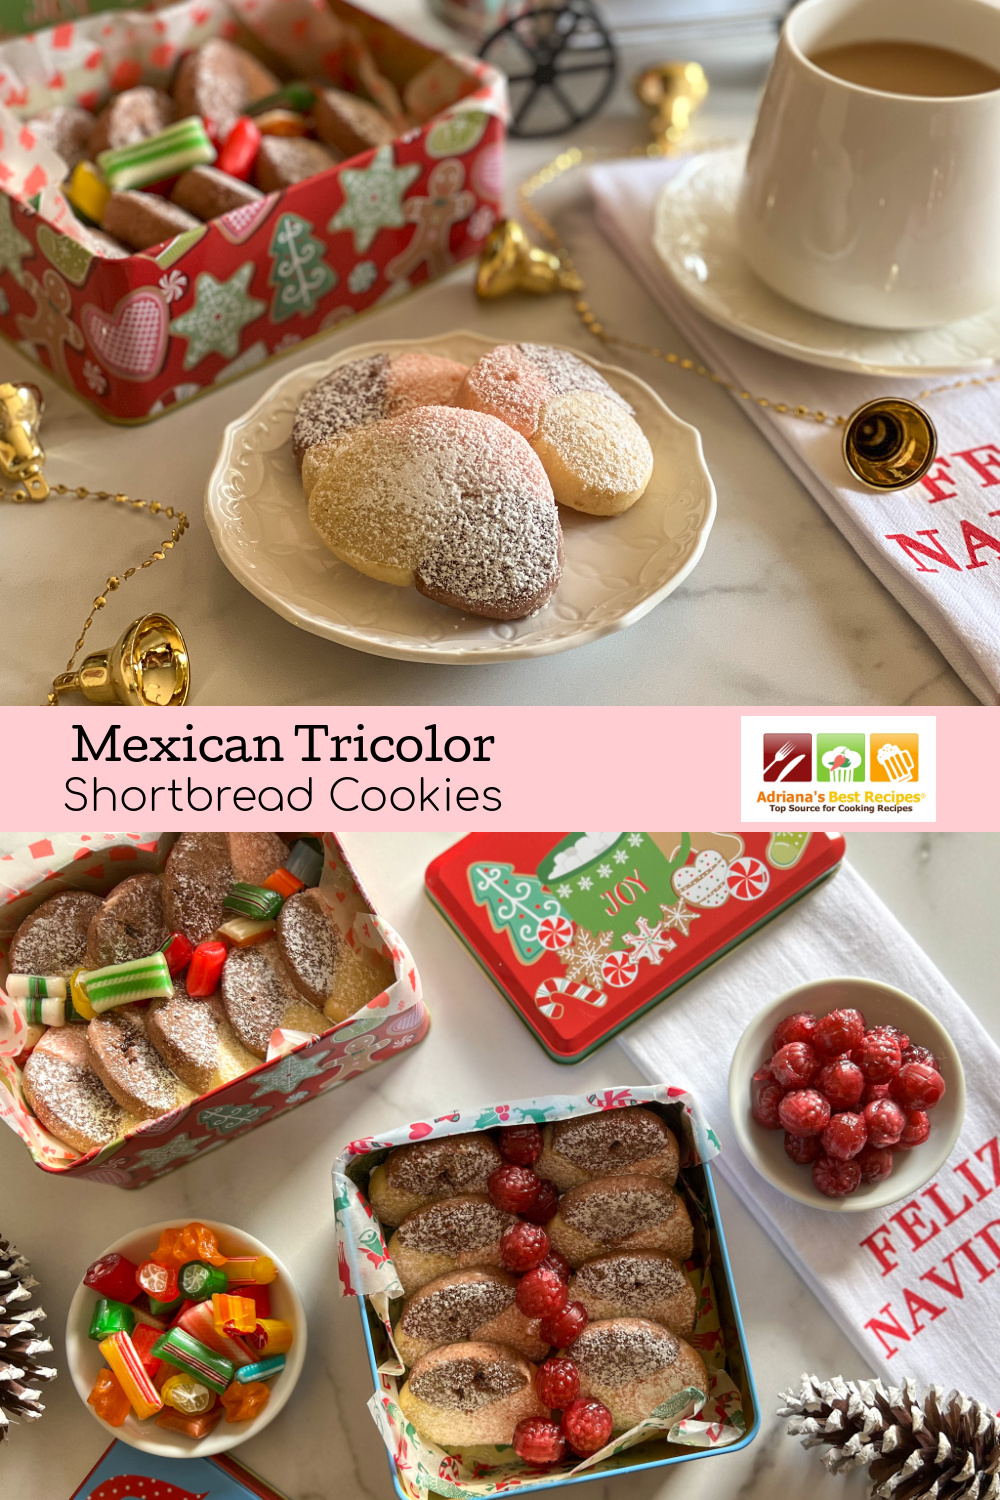 Anytime is a good time to bake authentic Mexican tricolor shortbread cookies, also called shortening cookies (galletitas de manteca) or polvorones. The recipe calls for all-purpose flour, vegetable shortening, confectioners sugar, salt, vanilla extract, pink edible gel color.